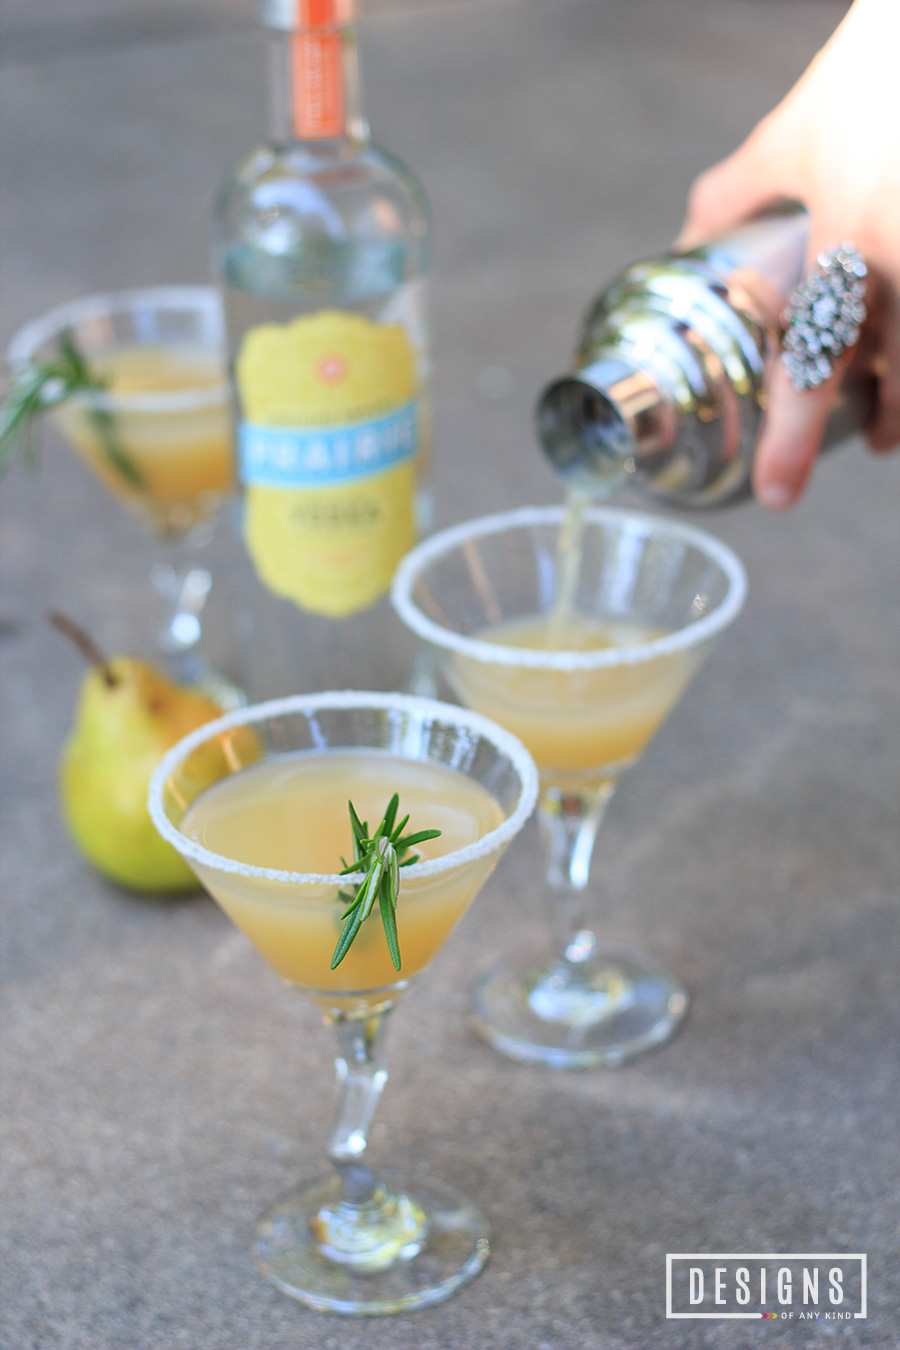 Pear & Rosemary Martini | Designs of Any Kind